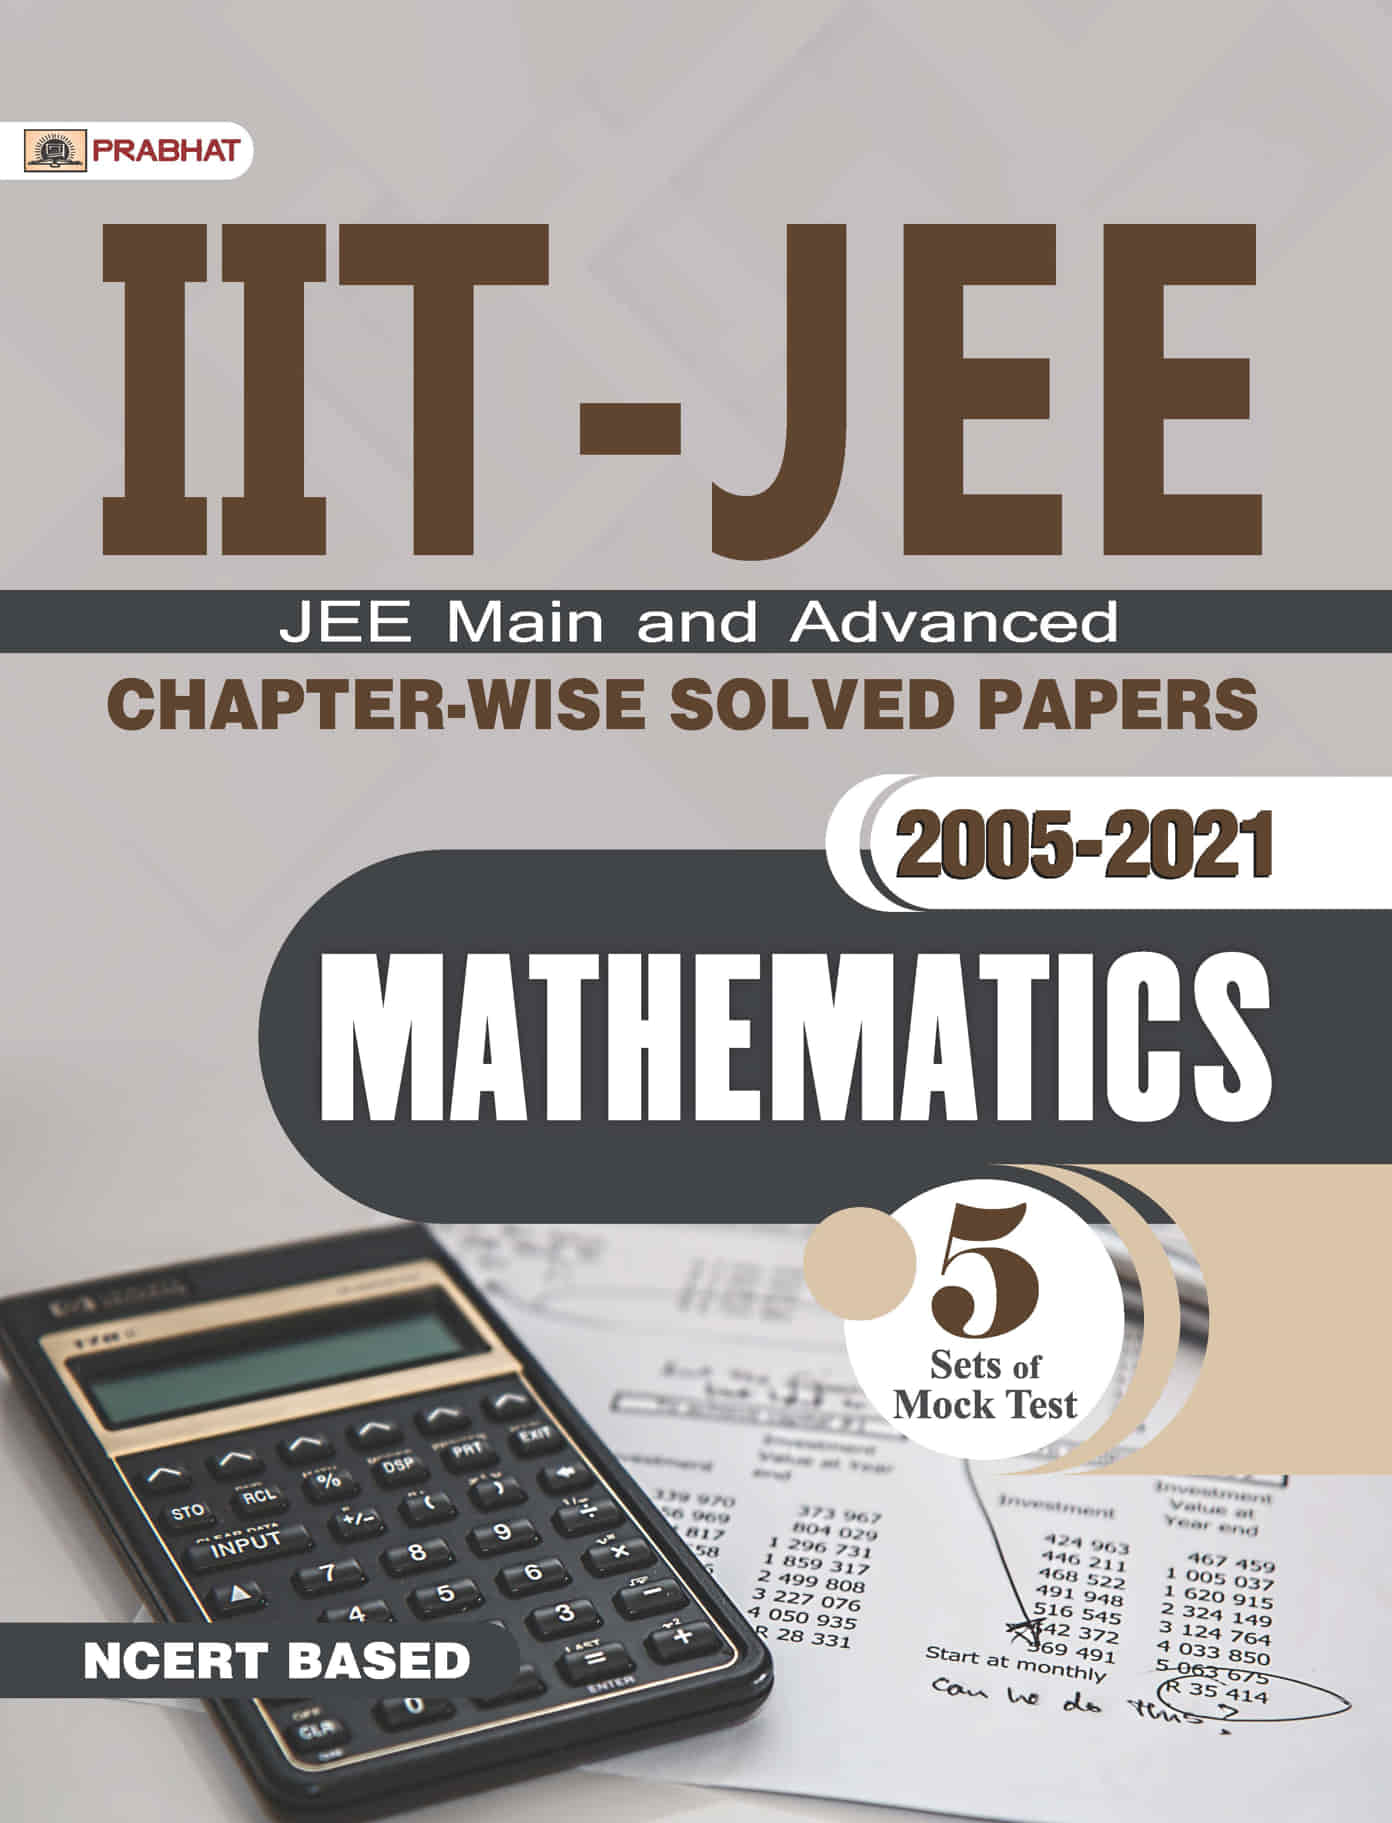 IIT-JEE Main & Advanced Chapter-Wise Solved Papers: 2005-2022 Mathemat...